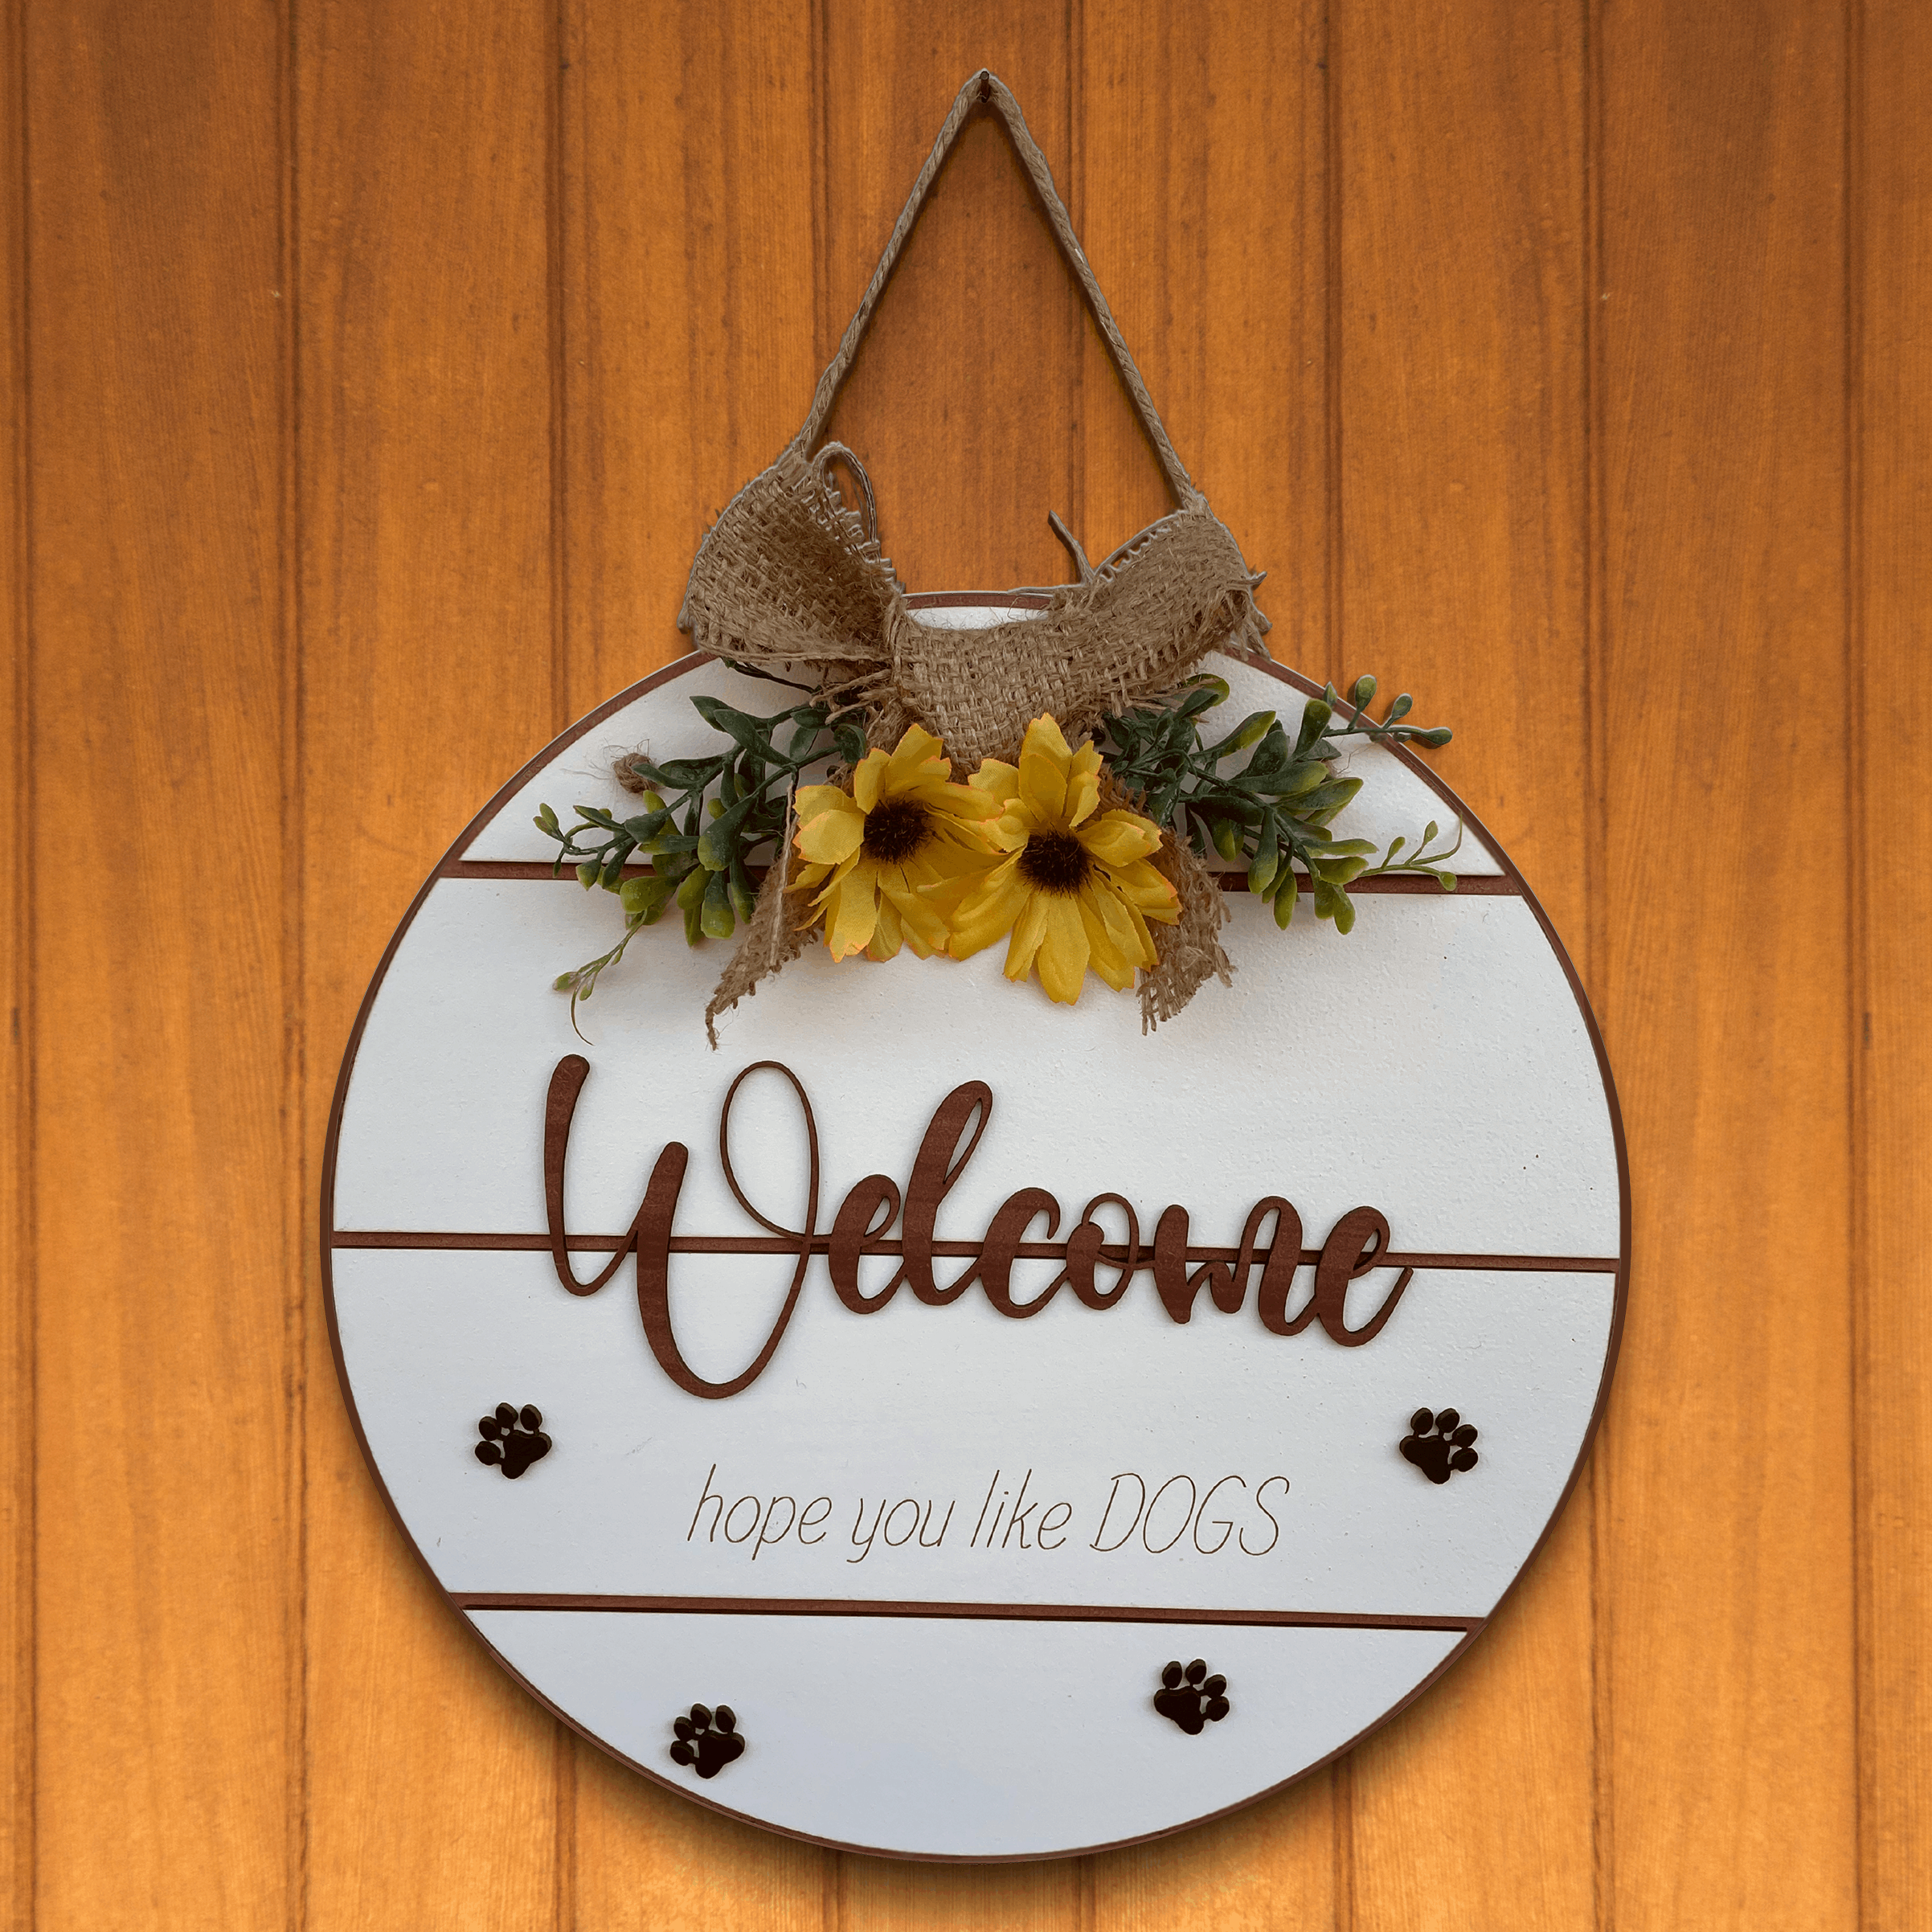 Welcome Hope You Like Dogs Wooden Hanging Wall Art Wemy Store